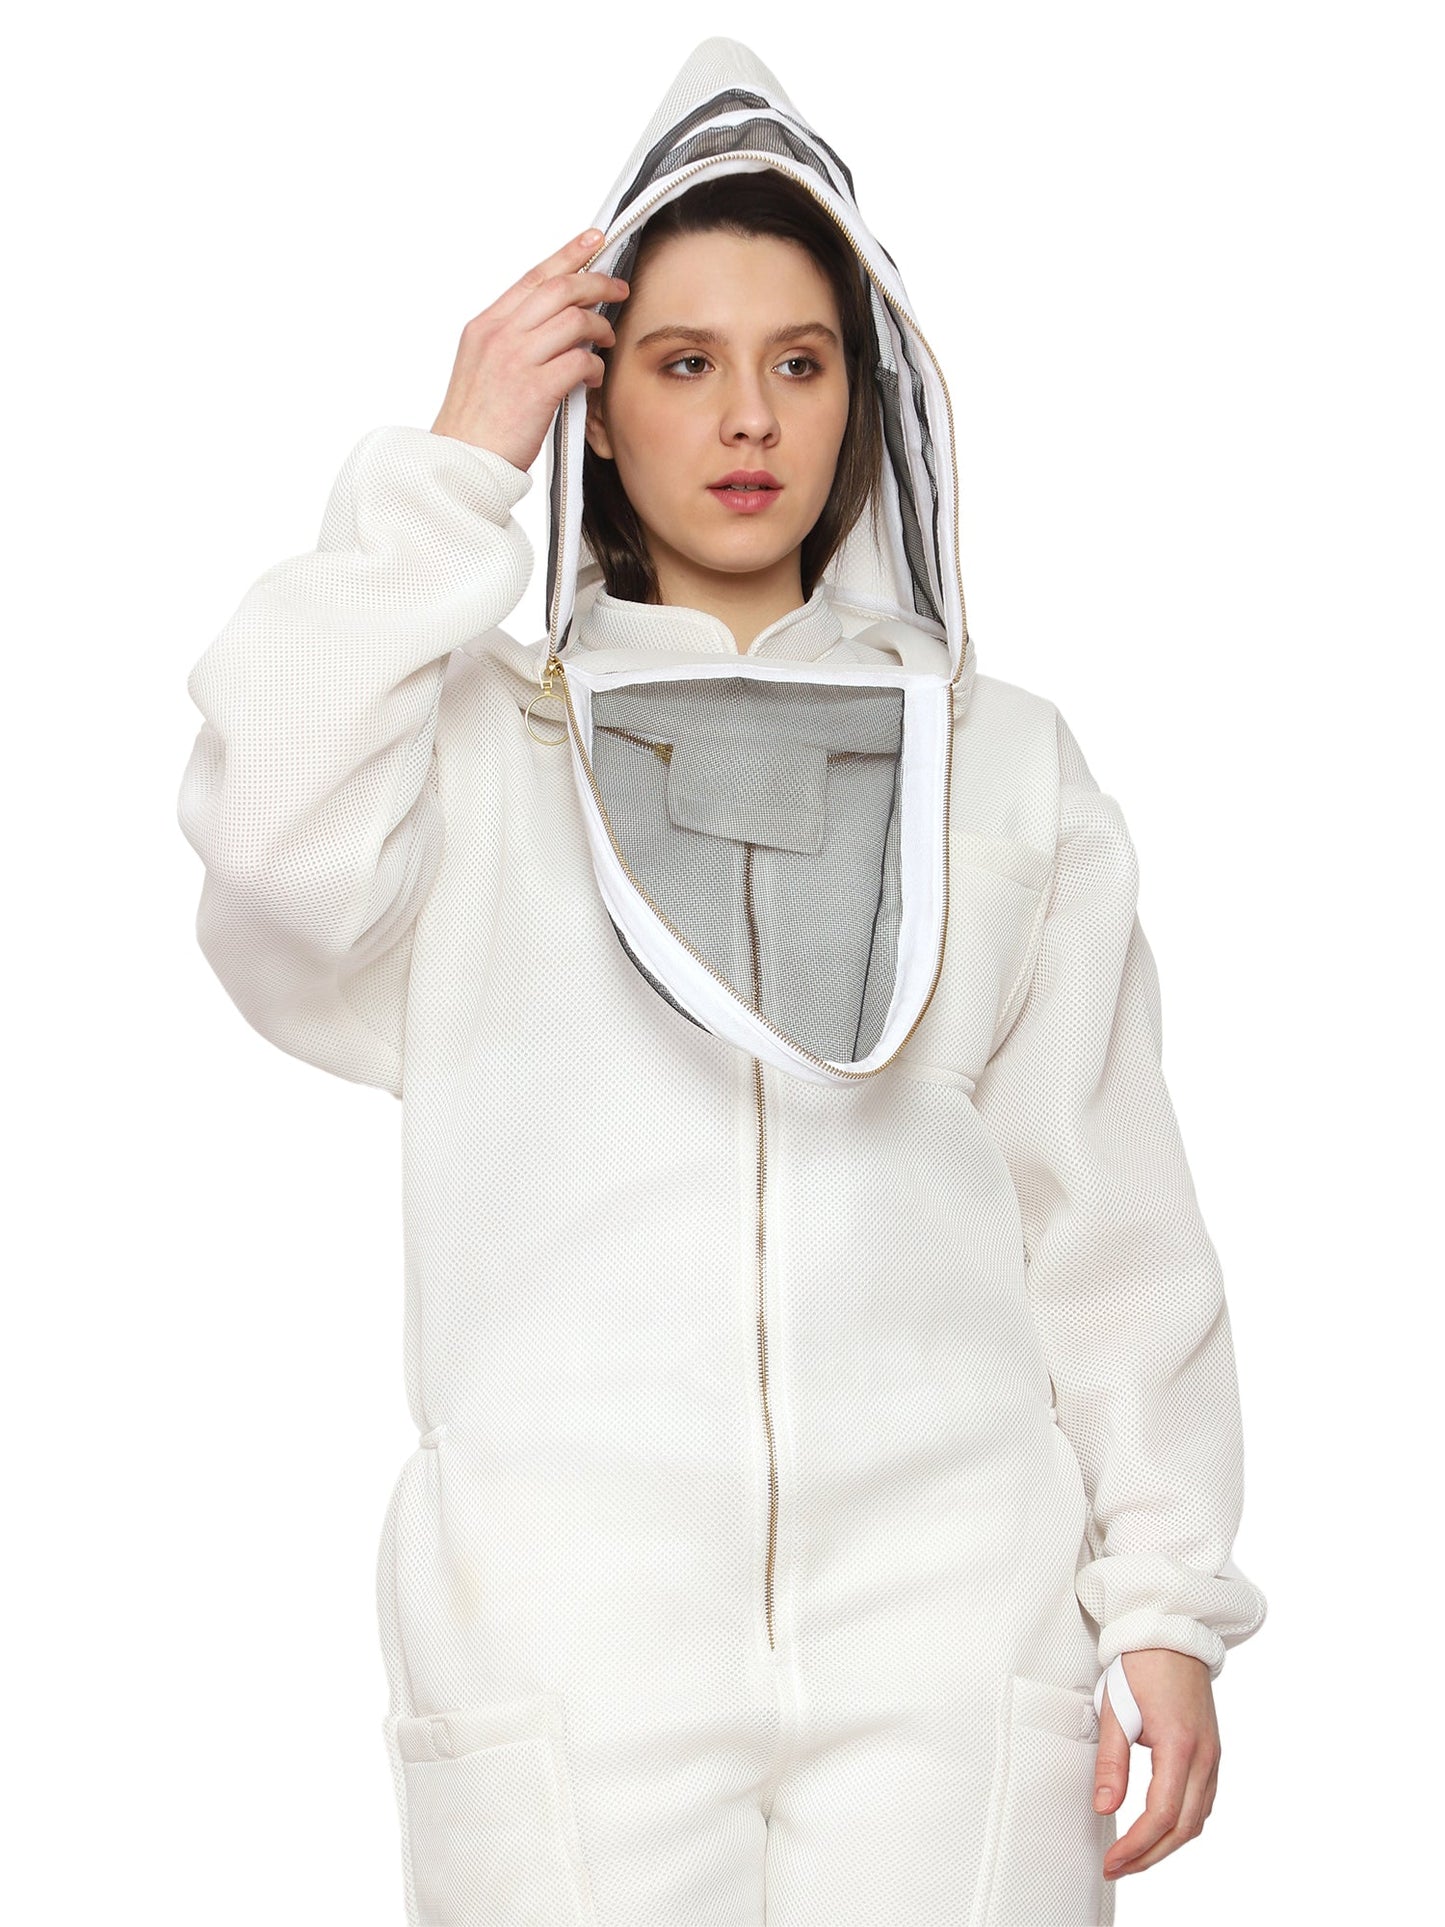 Beeattire Airmesh Bee Suit with Easy Access Veil - Ventilated Bee Suit For Women